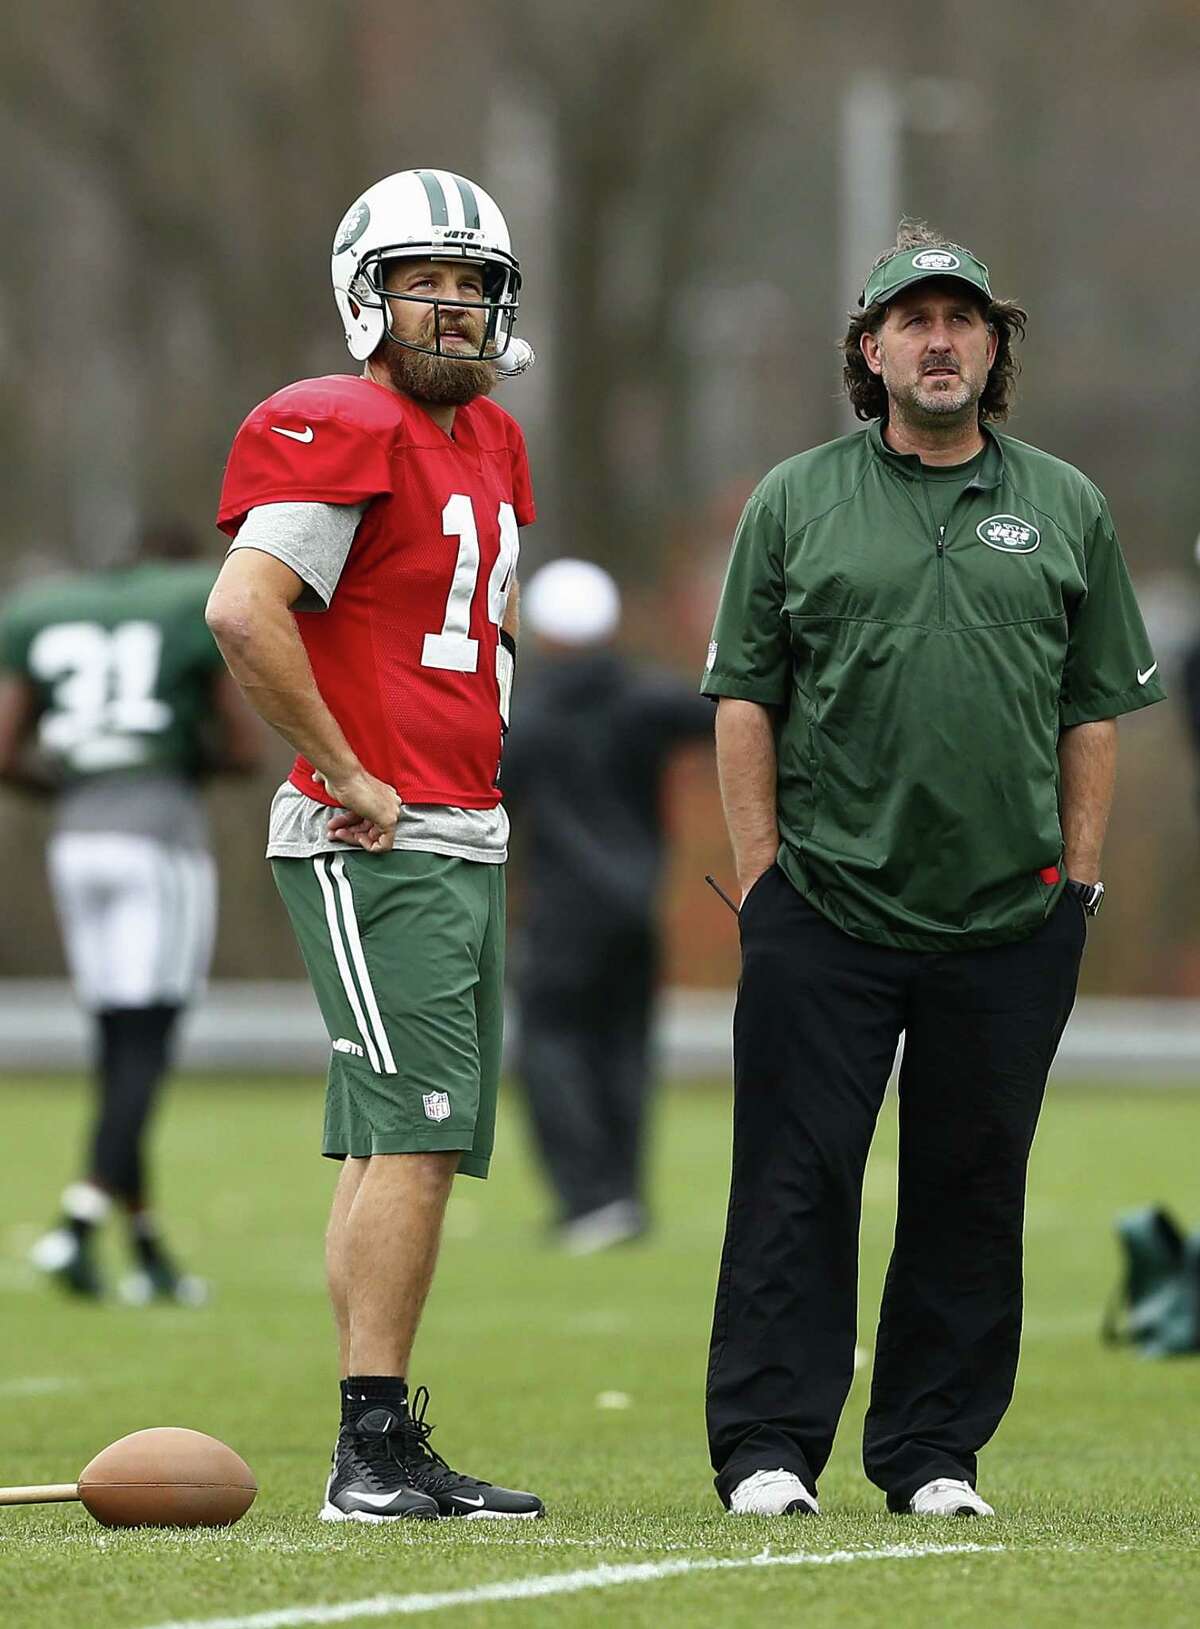 New York Jets quarterback Ryan Fitzpatrick talks with trainer John Mellody during Wednesday’s practice.